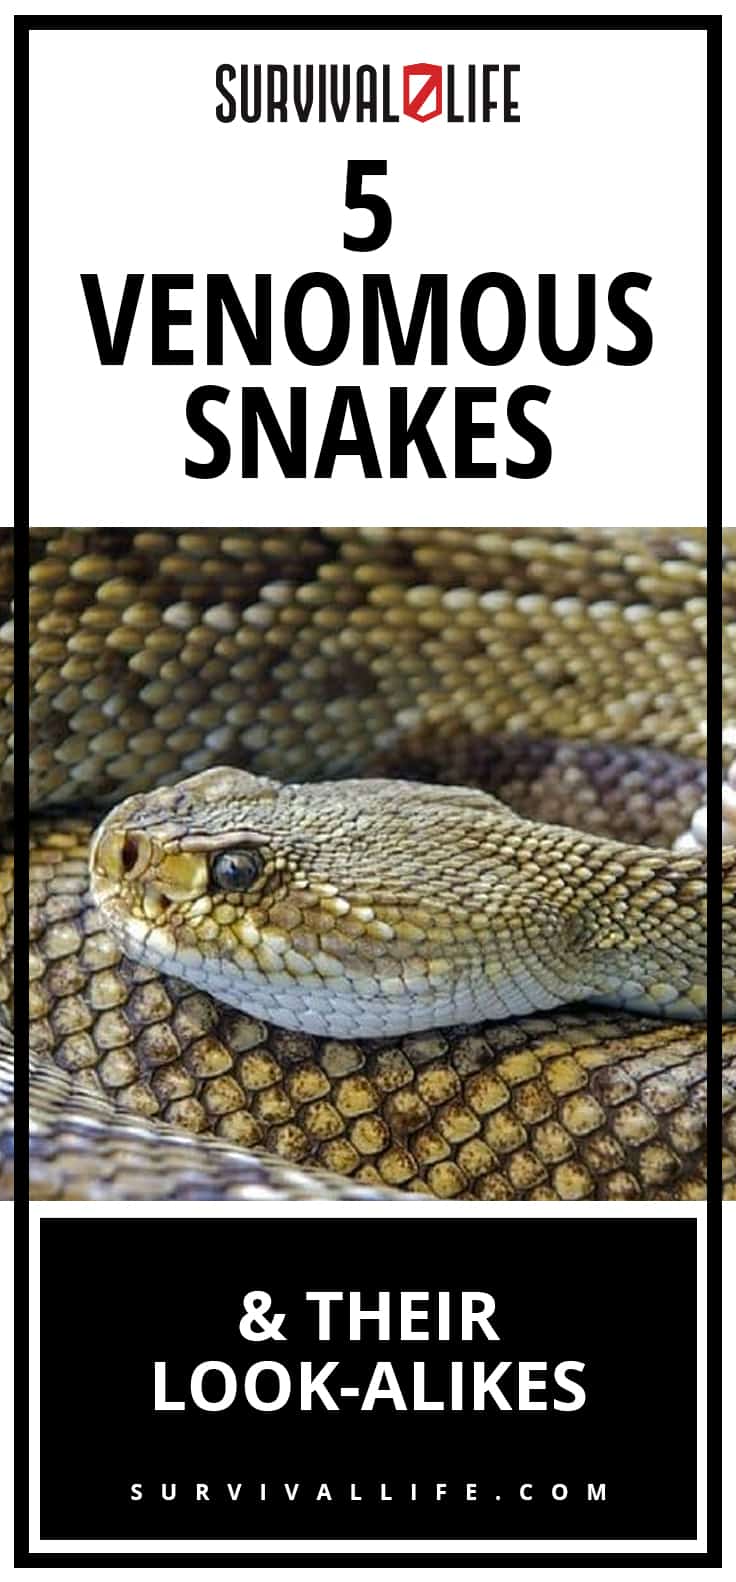 Venomous Snakes and Their Look-Alikes | https://survivallife.com/venomous-snakes-look-alikes/